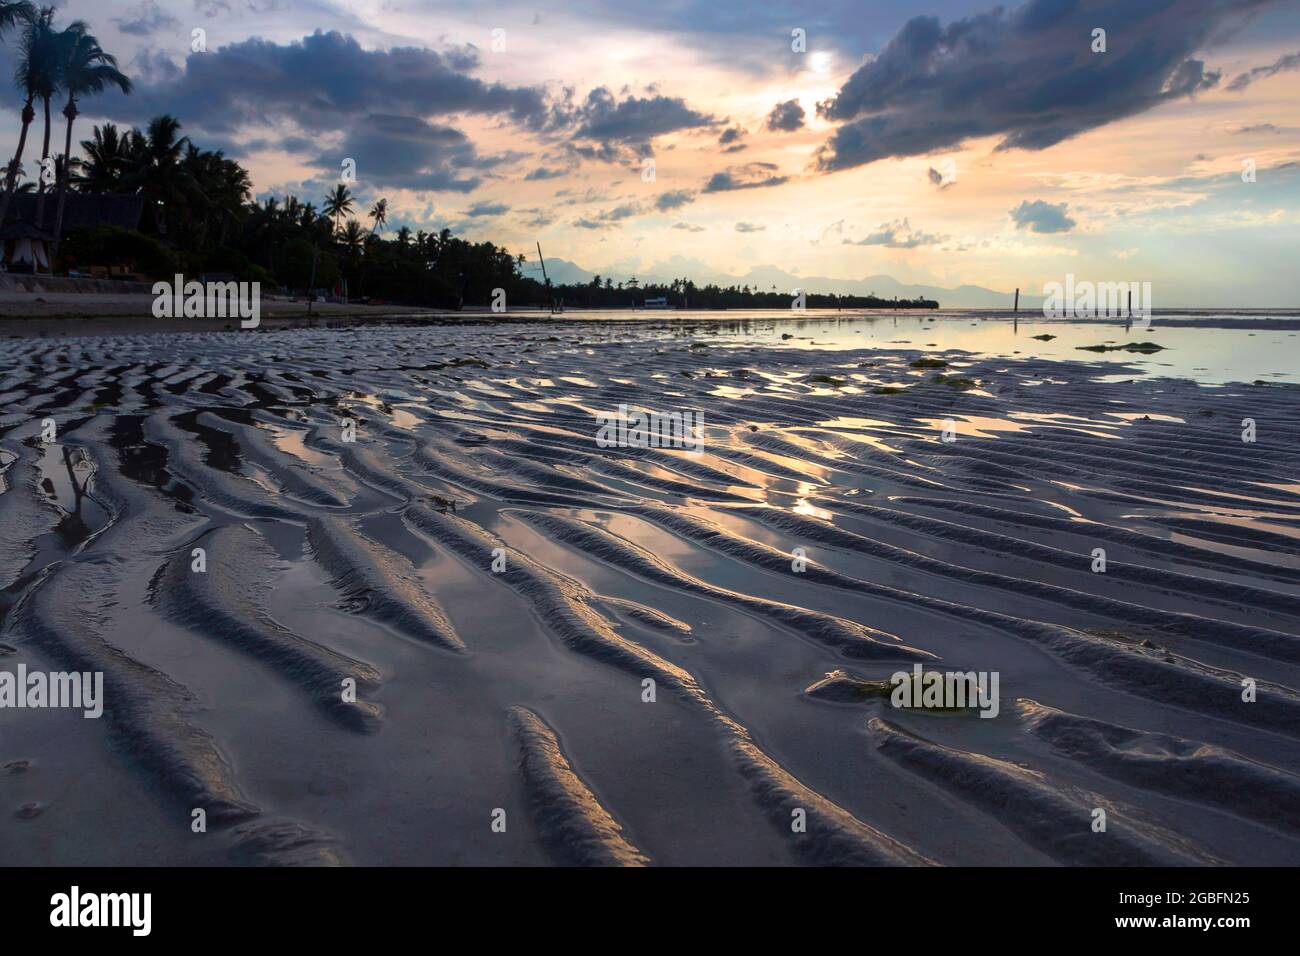 a view of a beach next to a body of water Stock Photo